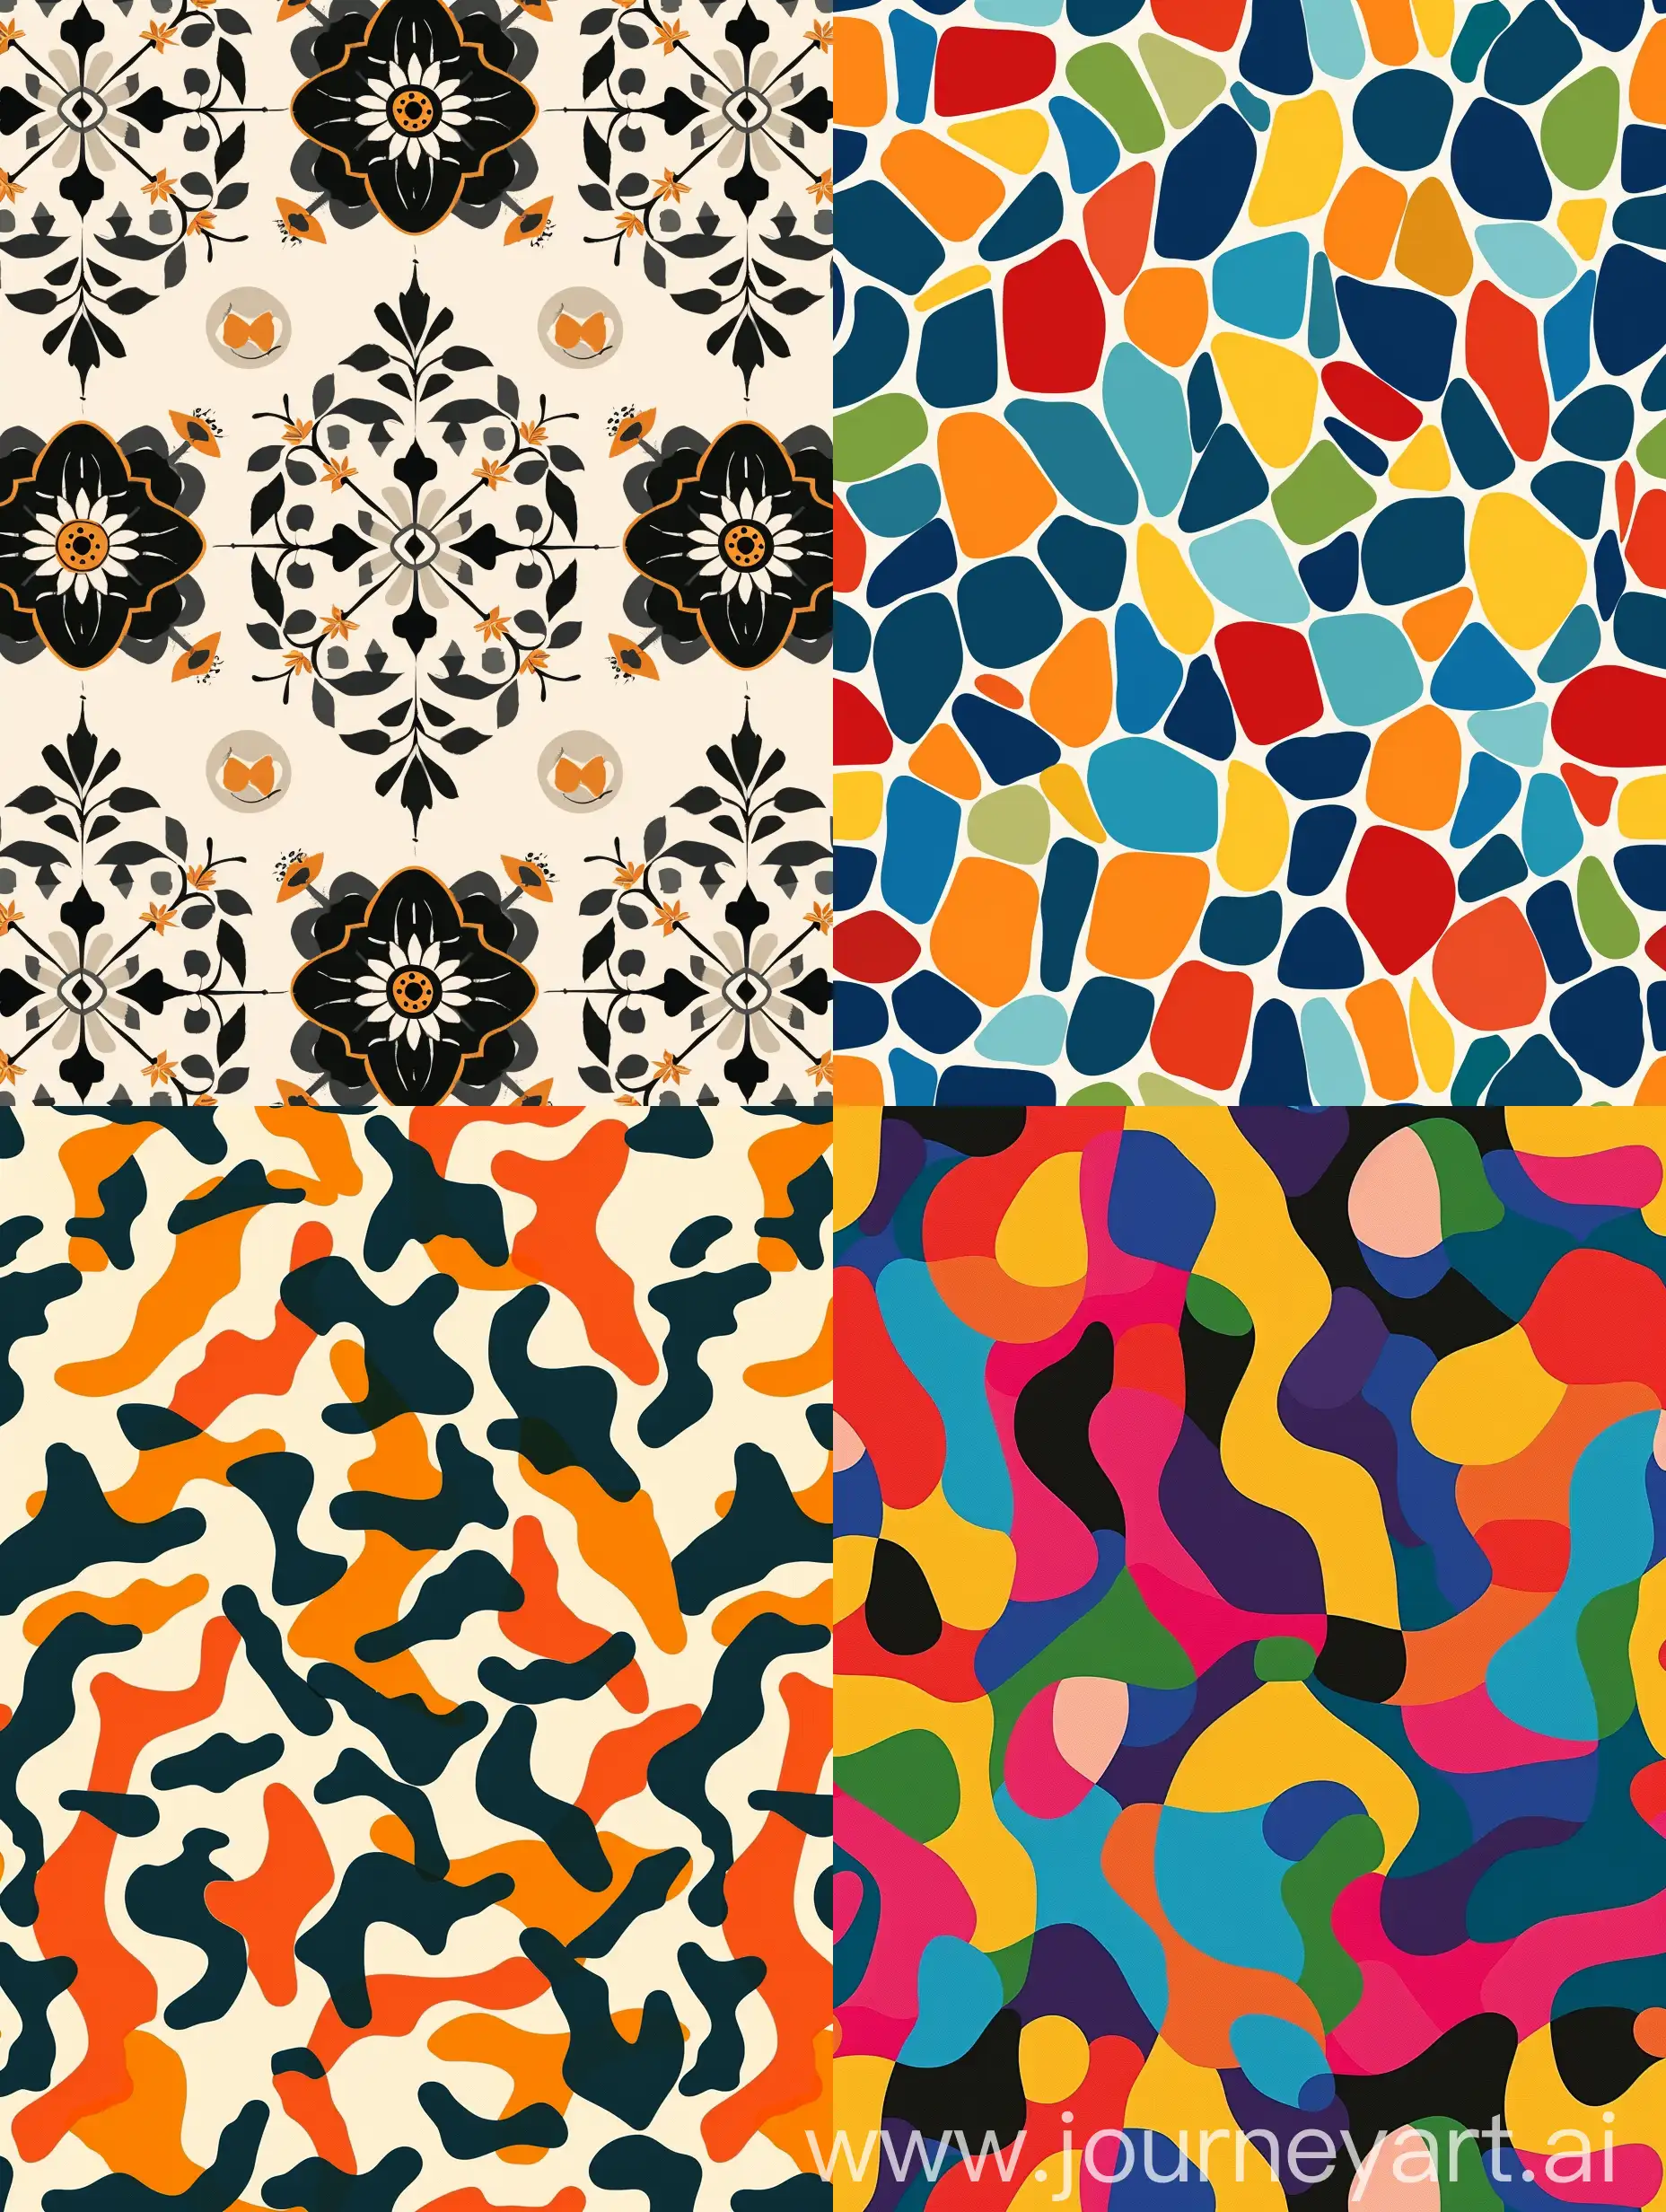 Colorful-Geometric-Patterns-Inspired-by-Paul-Klees